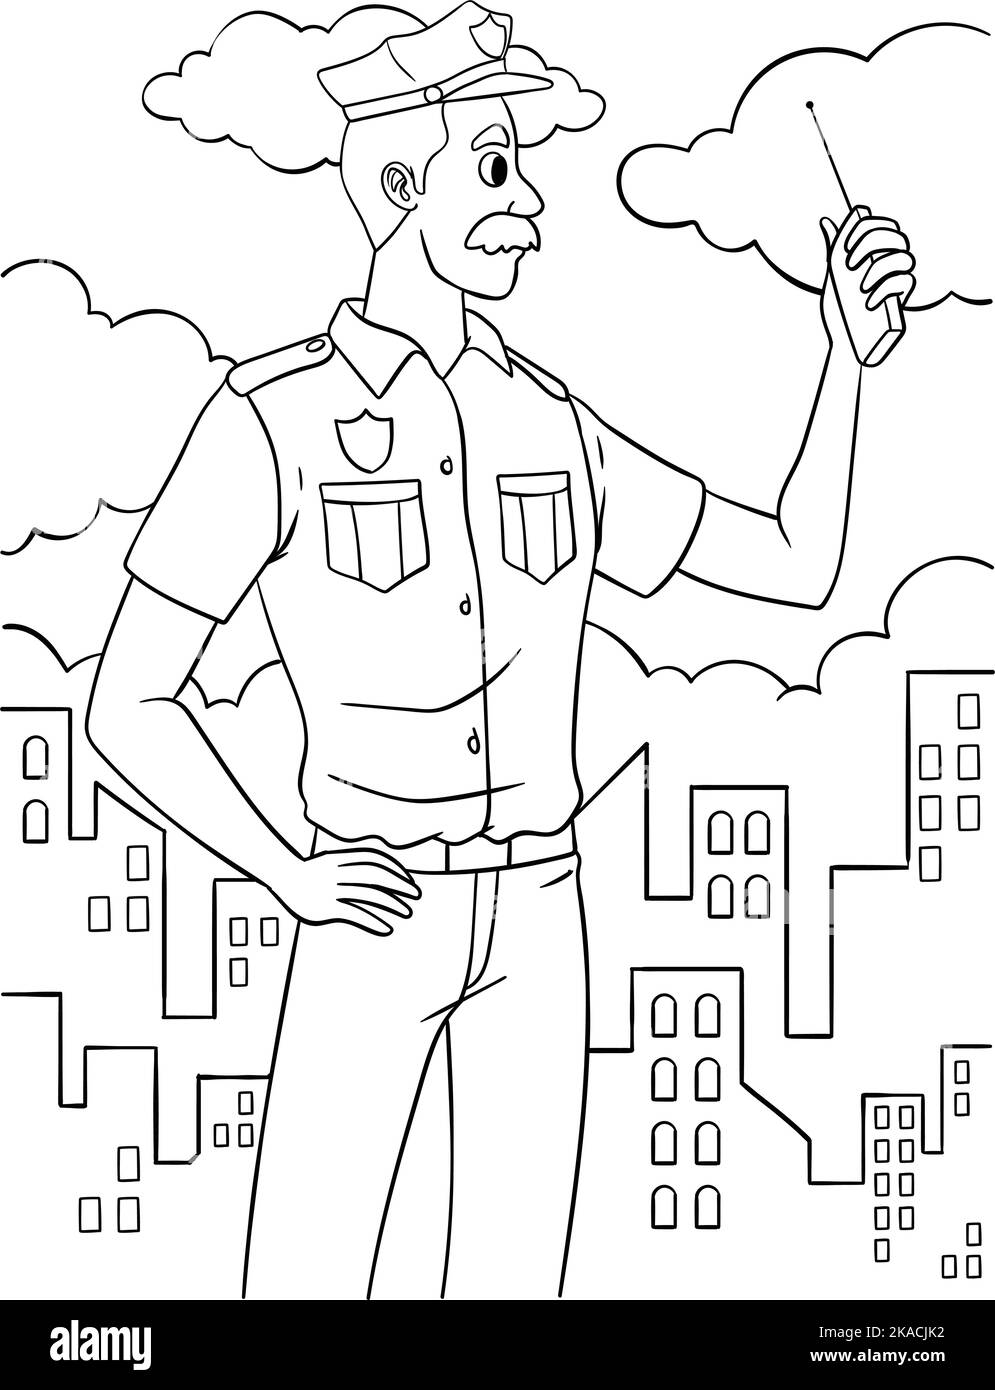 Policeman Coloring Page for Kids Stock Vector